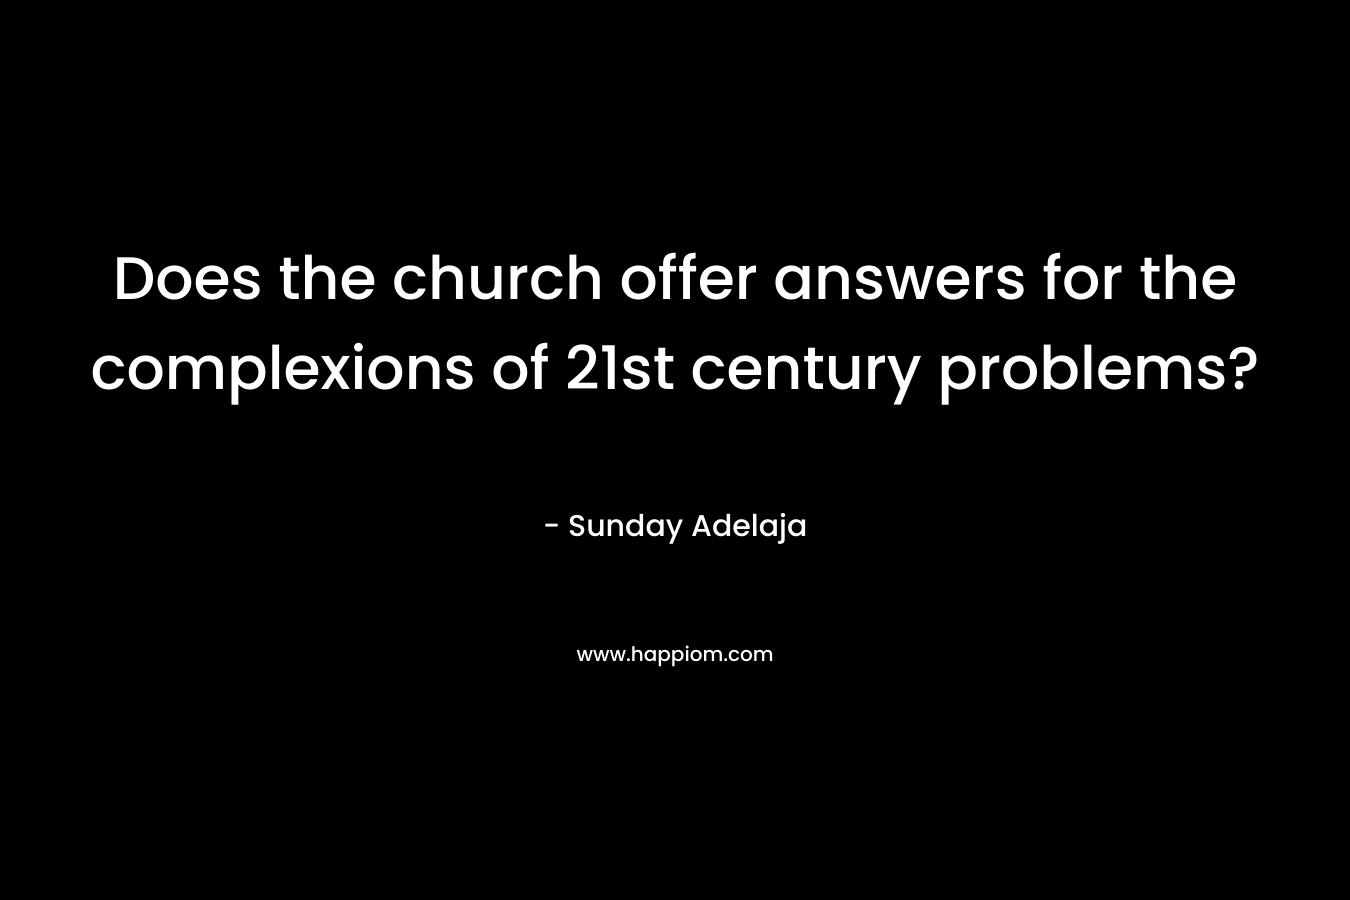 Does the church offer answers for the complexions of 21st century problems?